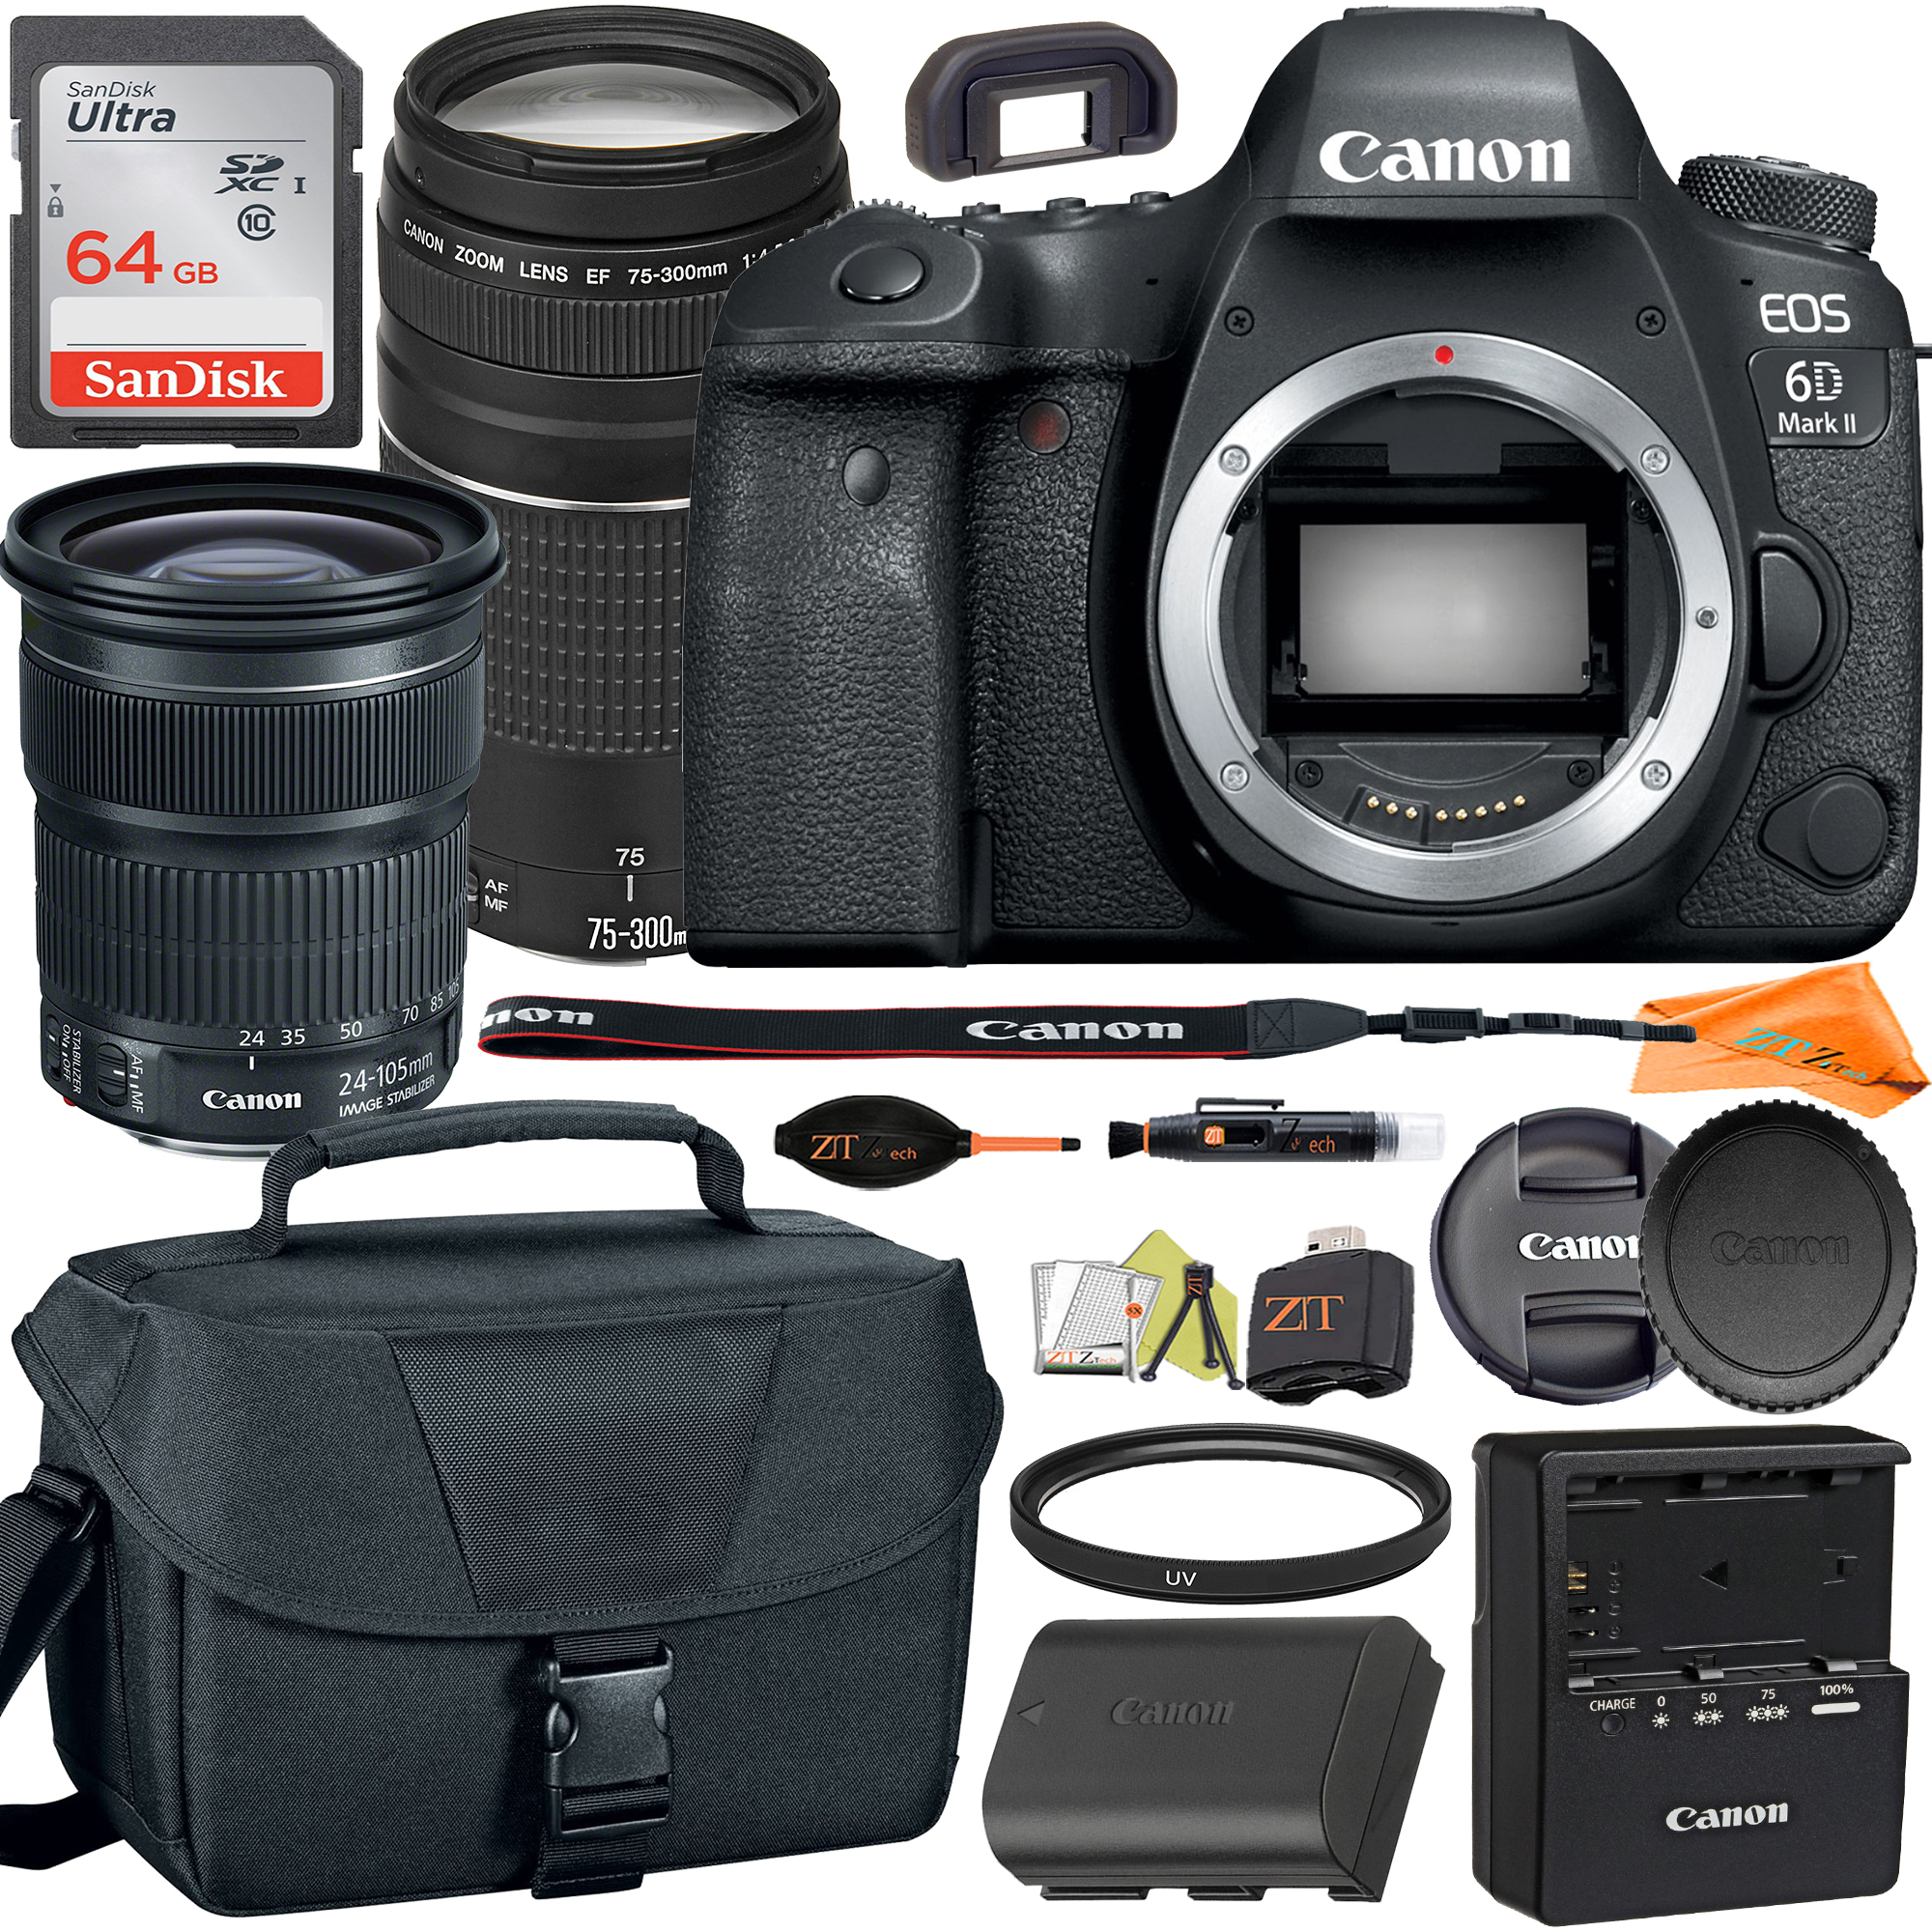 Canon EOS 6D Mark II DSLR Camera with 24-105mm + 75-300mm Lens with SanDisk 64GB Card + Case + ZeeTech Accessory Bundle